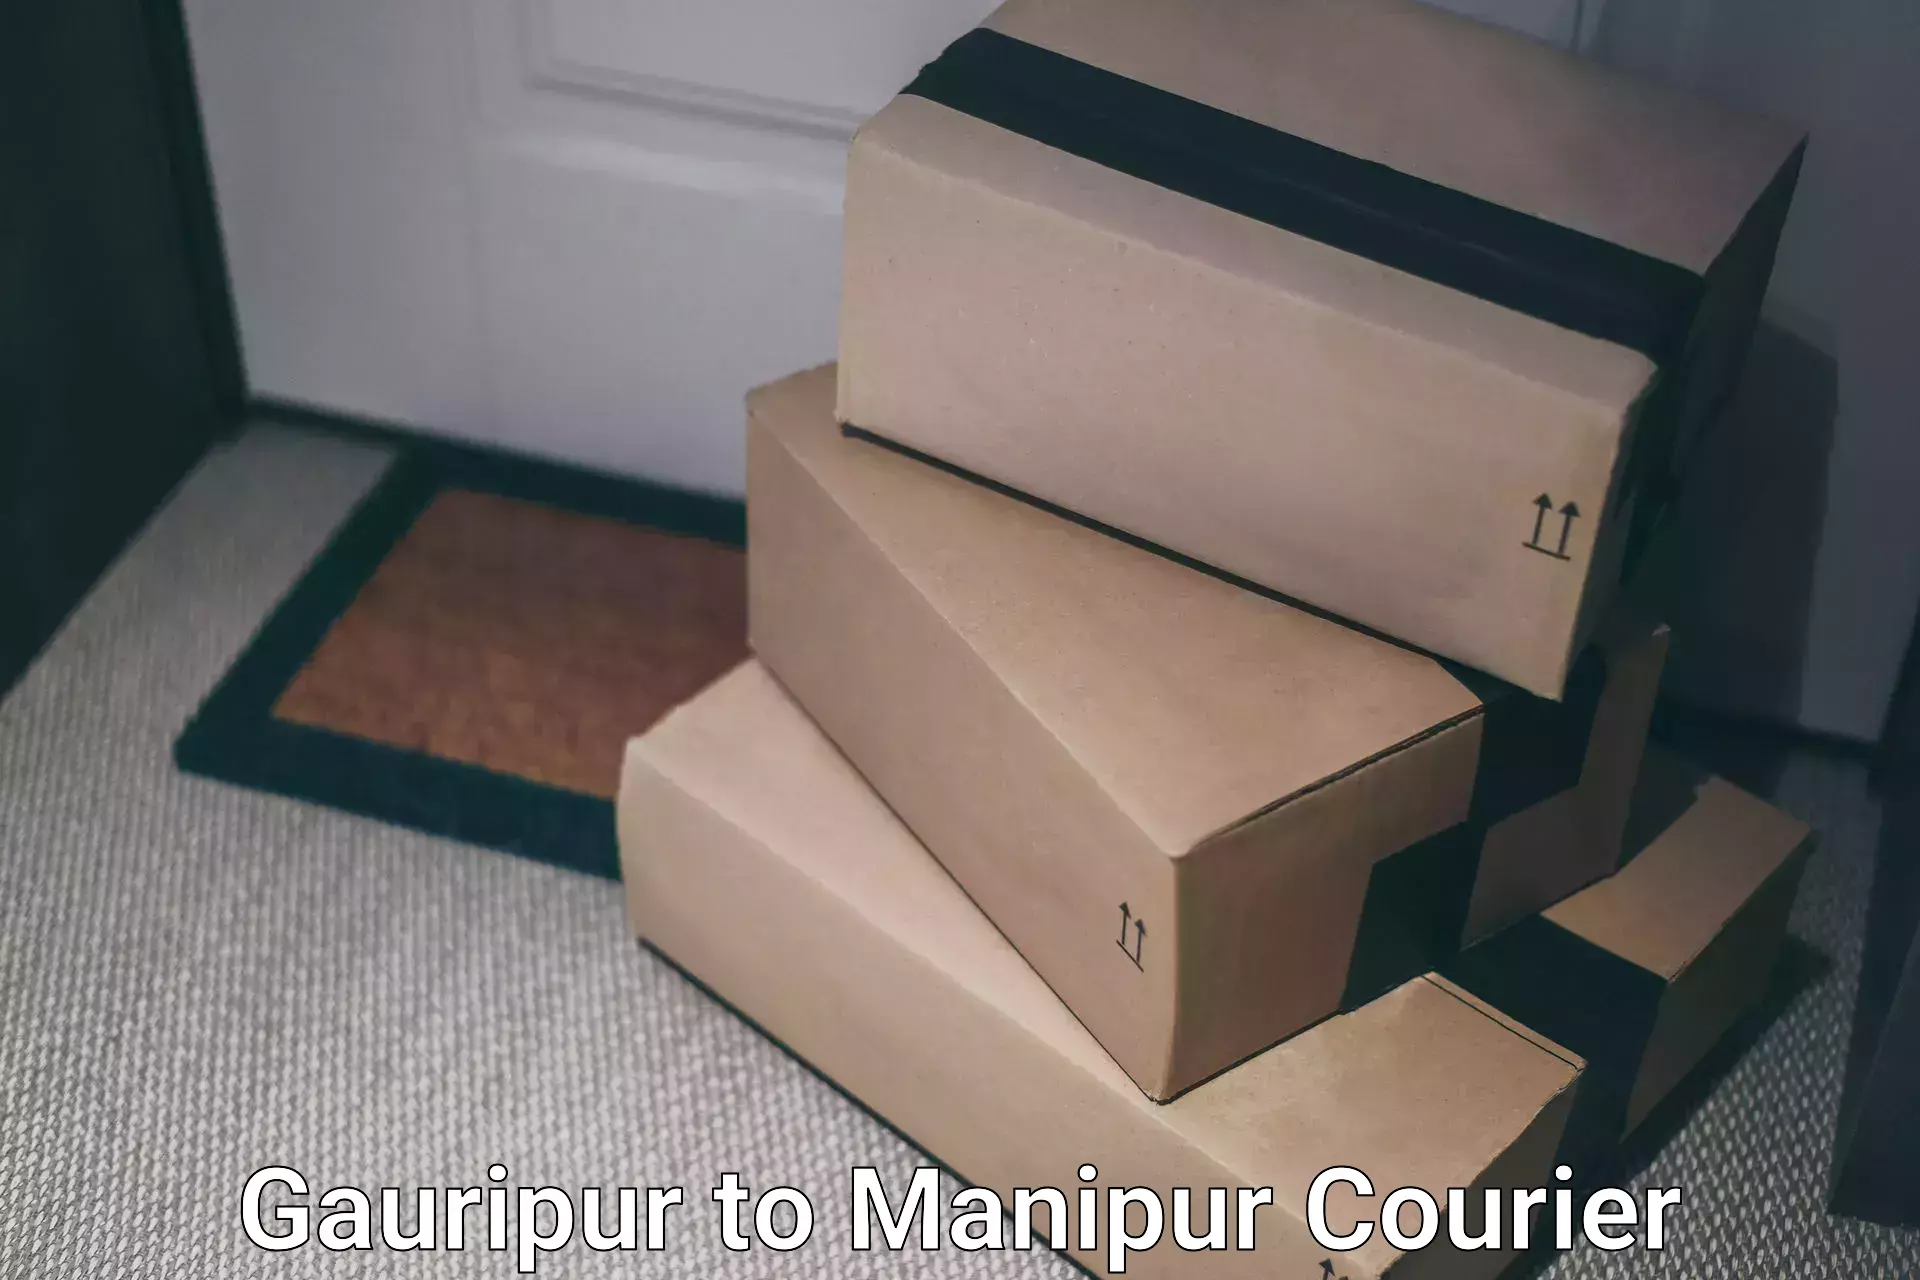 Cargo delivery service Gauripur to Manipur